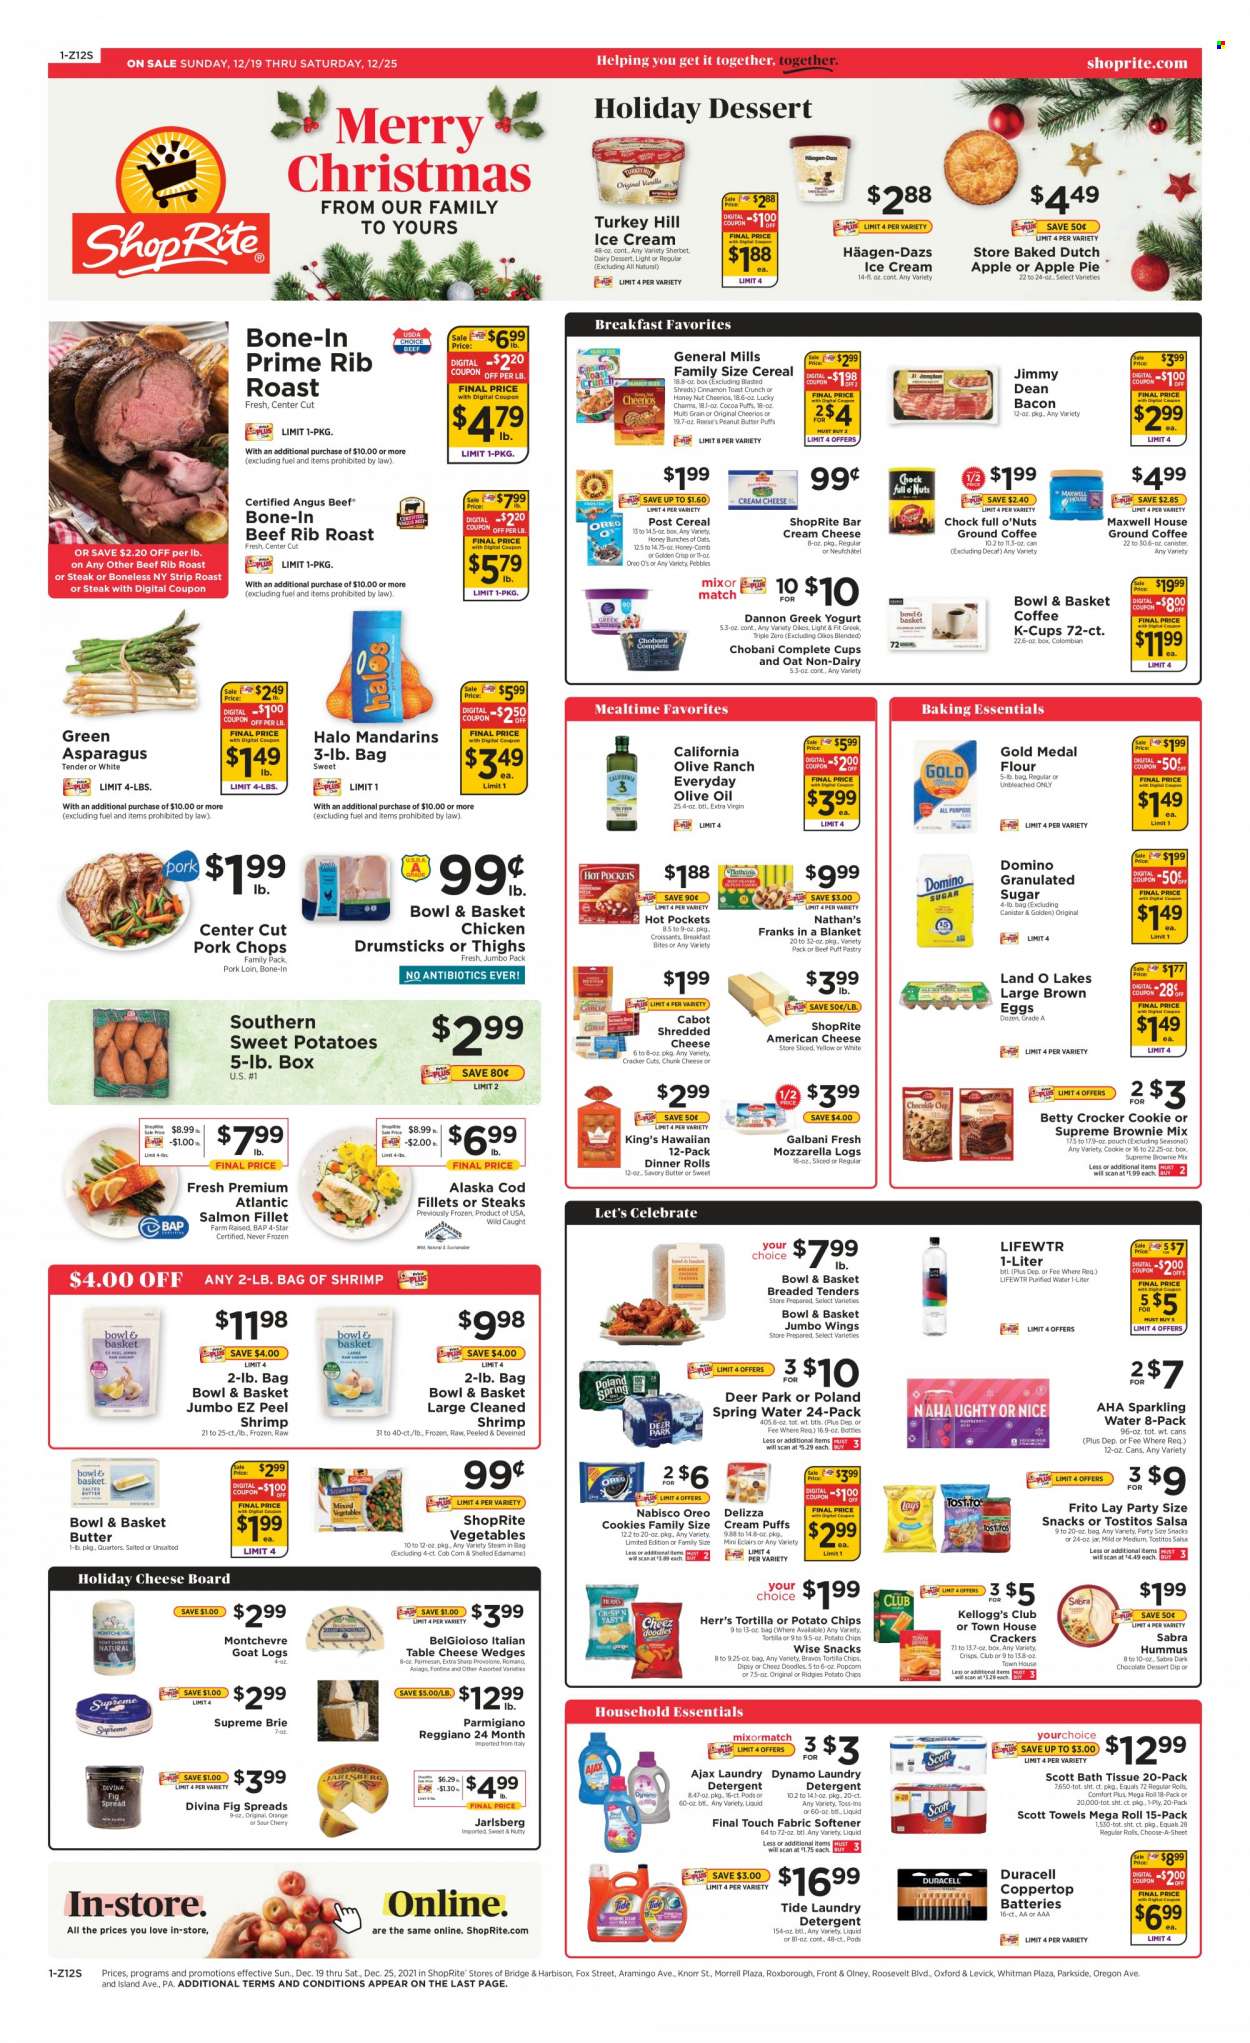 thumbnail - ShopRite Flyer - 12/19/2021 - 12/25/2021 - Sales products - pie, dinner rolls, Bowl & Basket, apple pie, brownie mix, asparagus, corn, Edamame, sweet potato, mandarines, oranges, cod, salmon, salmon fillet, shrimps, hot pocket, Knorr, Jimmy Dean, bacon, hummus, american cheese, asiago, cream cheese, Fontina, goat cheese, mozzarella, Neufchâtel, shredded cheese, parmesan, brie, Parmigiano Reggiano, Galbani, Montchevre, chunk cheese, Provolone, greek yoghurt, Oreo, Oikos, Chobani, Dannon, eggs, dip, ice cream, sherbet, Reese's, Häagen-Dazs, cookies, snack, crackers, Kellogg's, dark chocolate, tortilla chips, potato chips, popcorn, Tostitos, cocoa, granulated sugar, sugar, cereals, Cheerios, cinnamon, salsa, extra virgin olive oil, olive oil, oil, peanut butter, spring water, sparkling water, Lifewtr, Maxwell House, coffee capsules, K-Cups, chicken drumsticks, beef meat, steak, pork chops, pork loin, pork meat, bath tissue, Scott, detergent, Ajax, Tide, fabric softener, laundry detergent, comb, cheese board, battery, Duracell. Page 1.